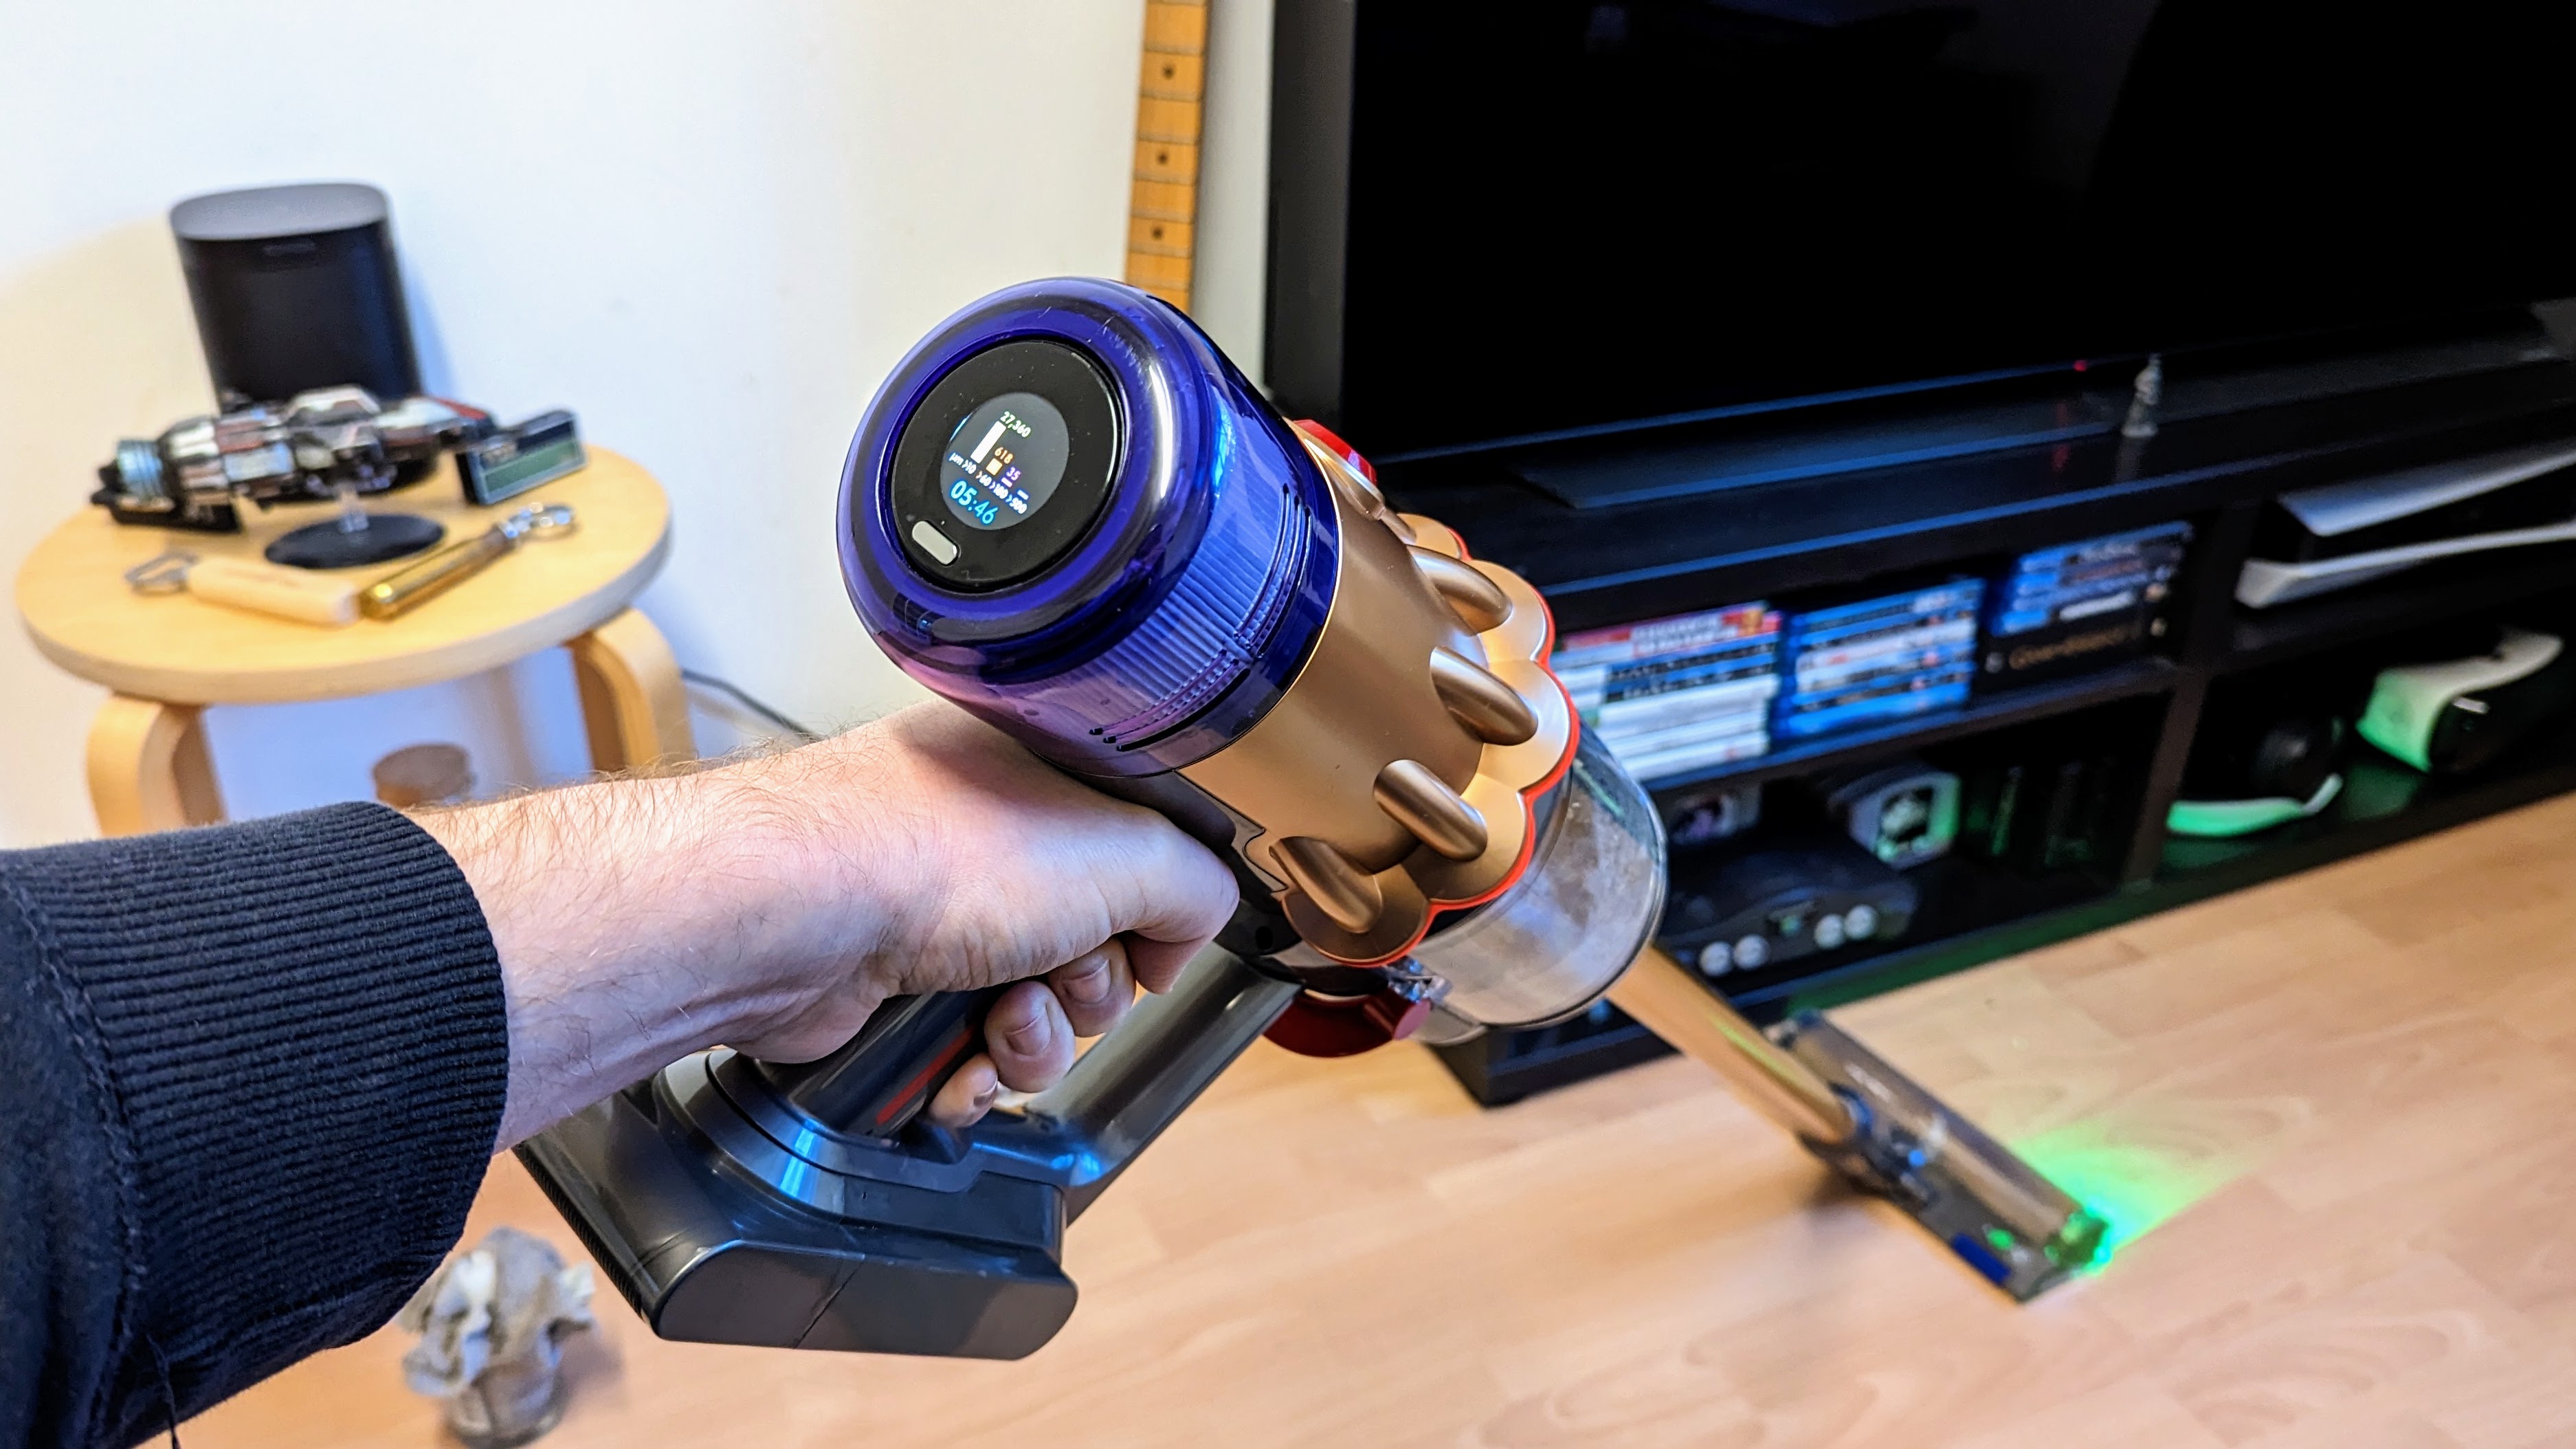 This Dyson vacuum cleaner is a sci-fi tech marvel — and I love it